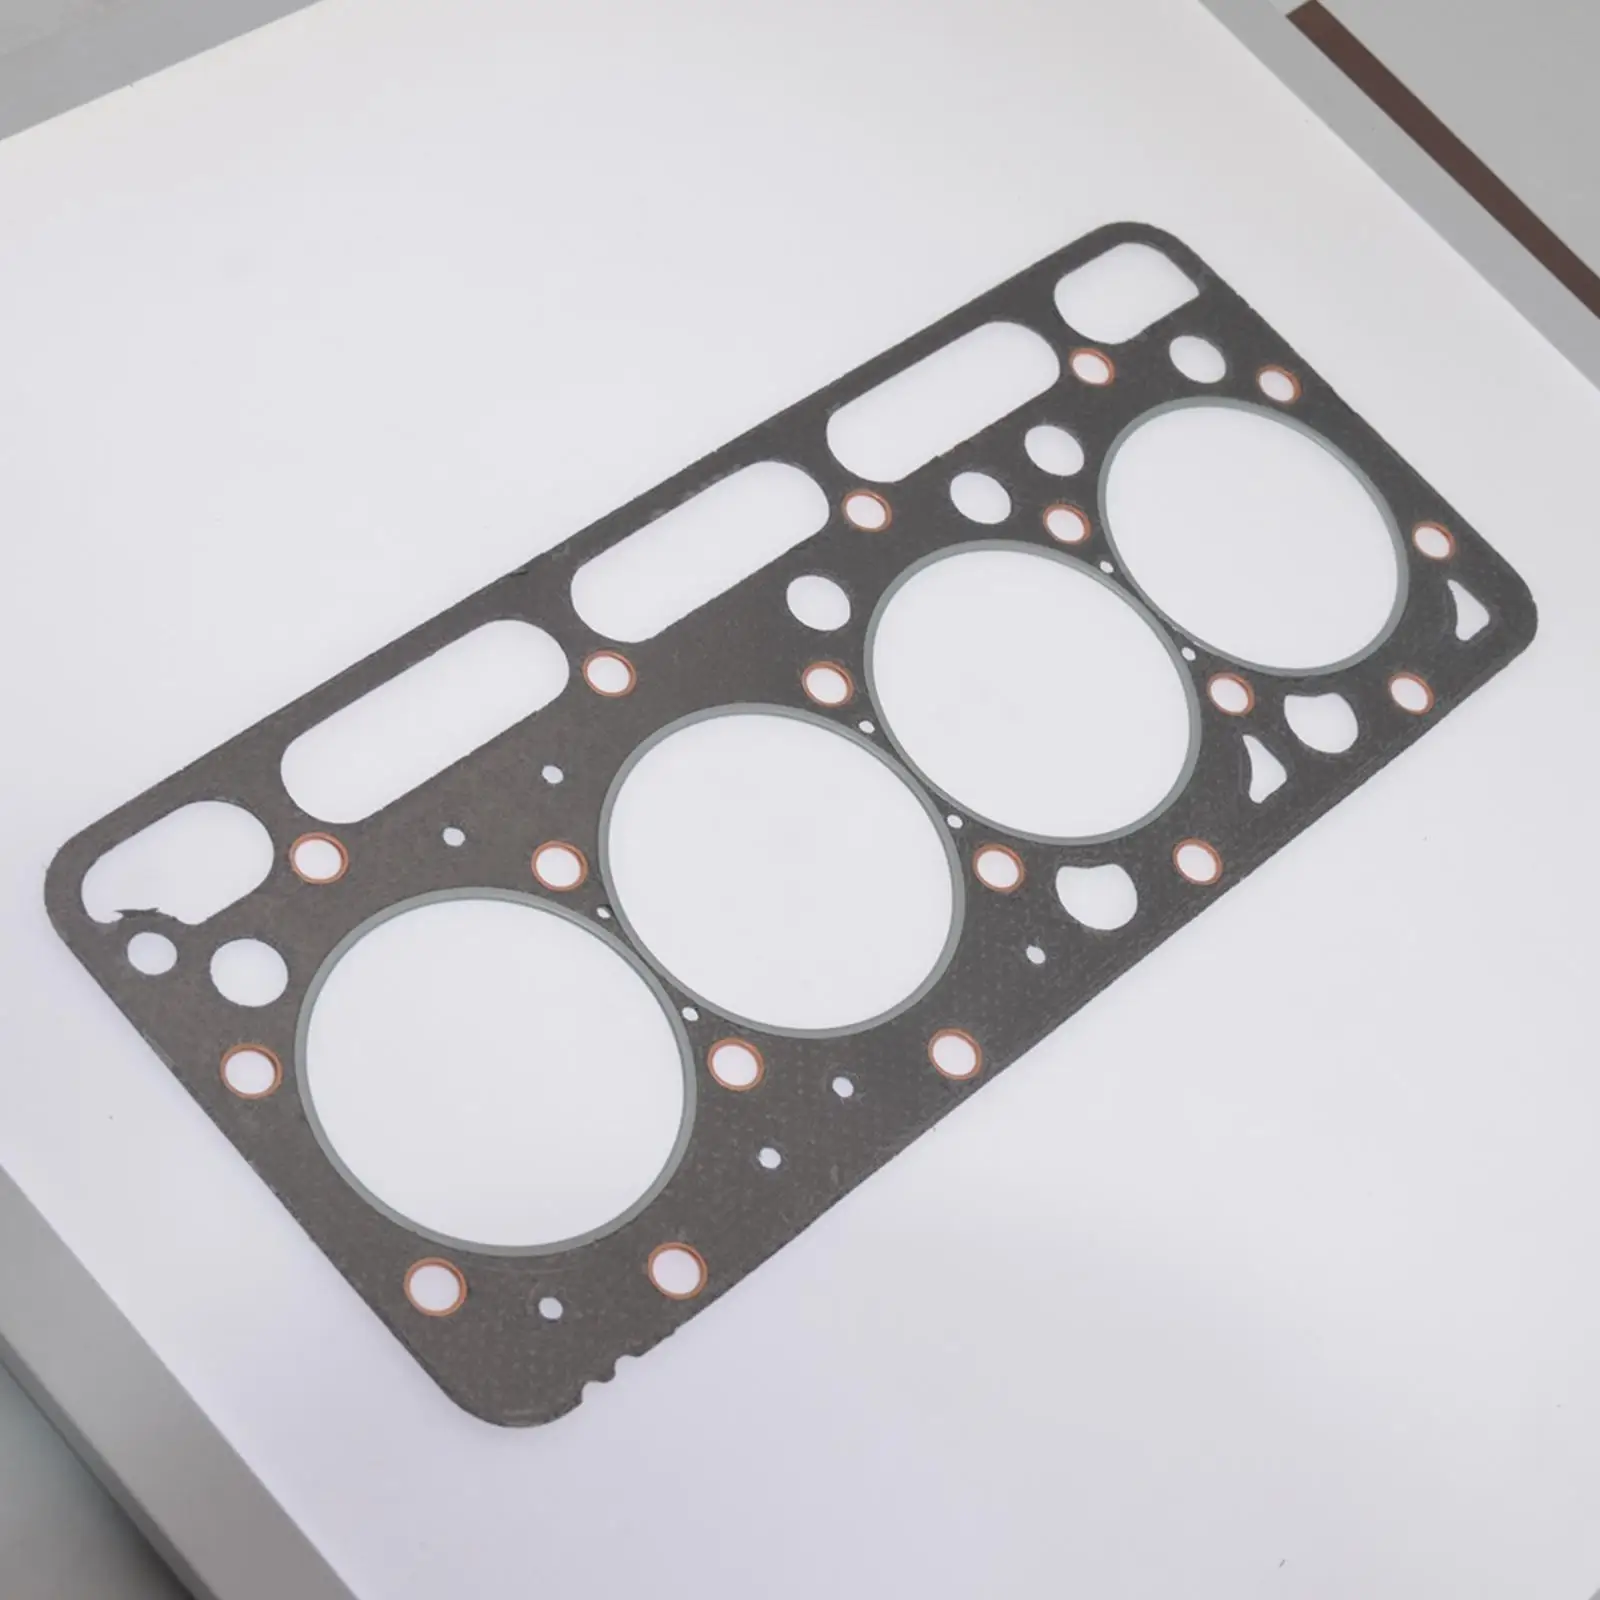 19077-03310 Cylinder Head Gasket Replacement Accessories Premium Professional Parts Easy to Install Metal for Kubota Bobcat